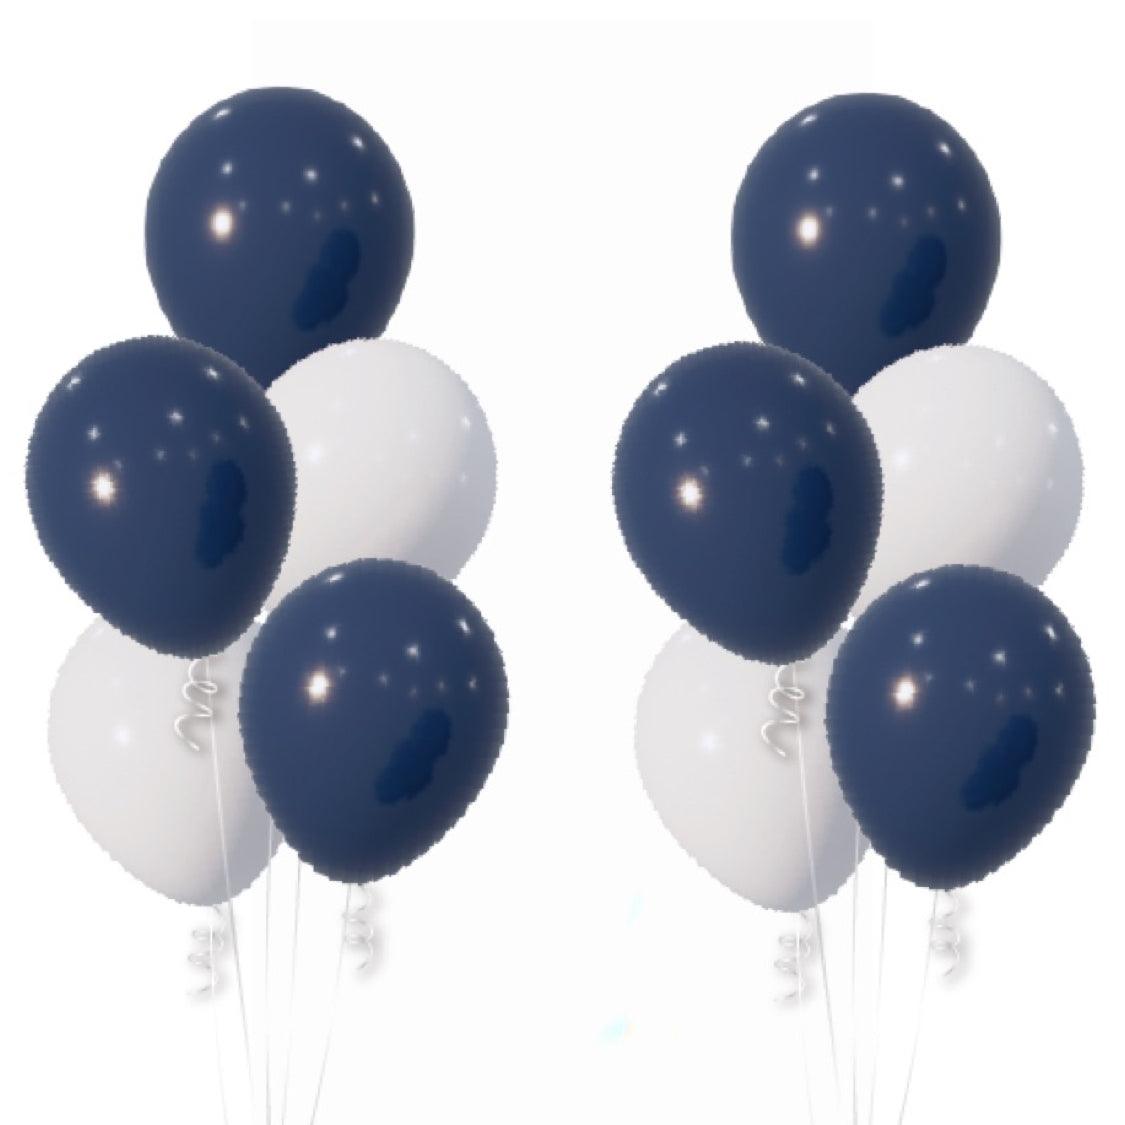 Navy blue & white helium balloon 2 bouquets of 5 - ONE UP BALLOONS